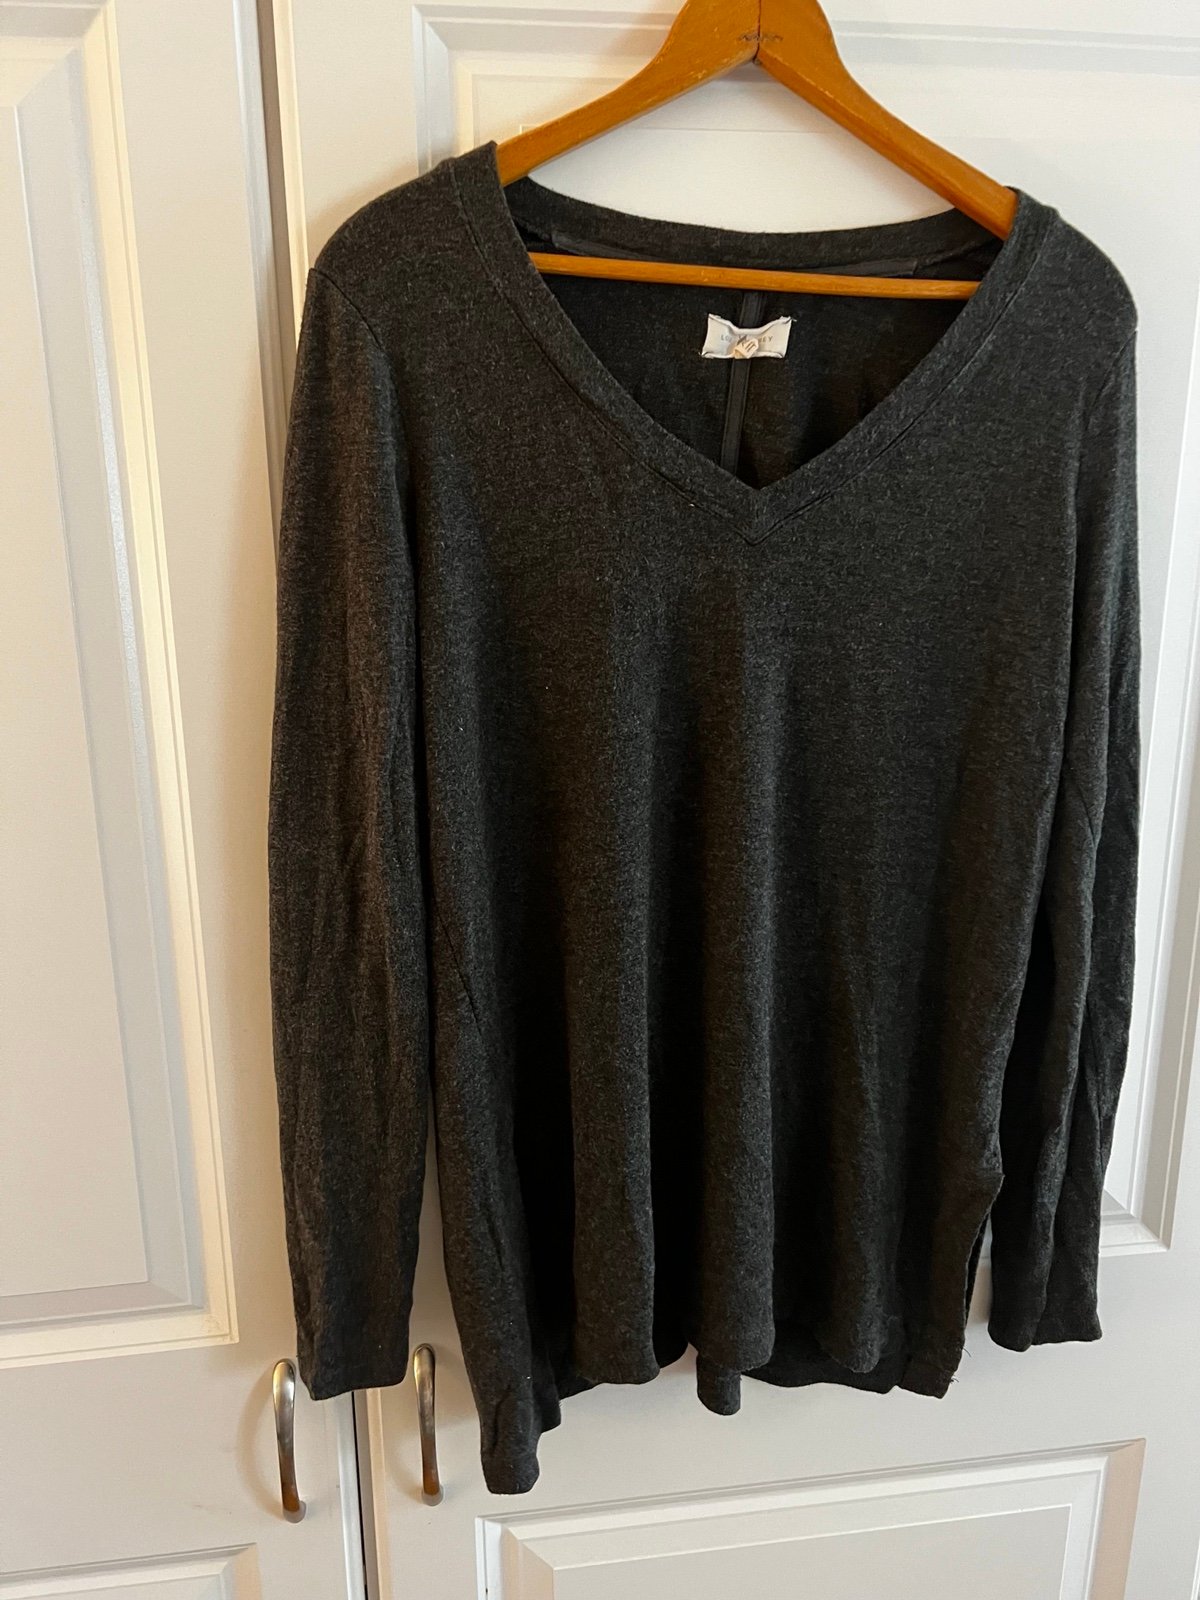 Promotions  Lou & grey  knit V neck sweater, small KzSLYpW4L Buying Cheap